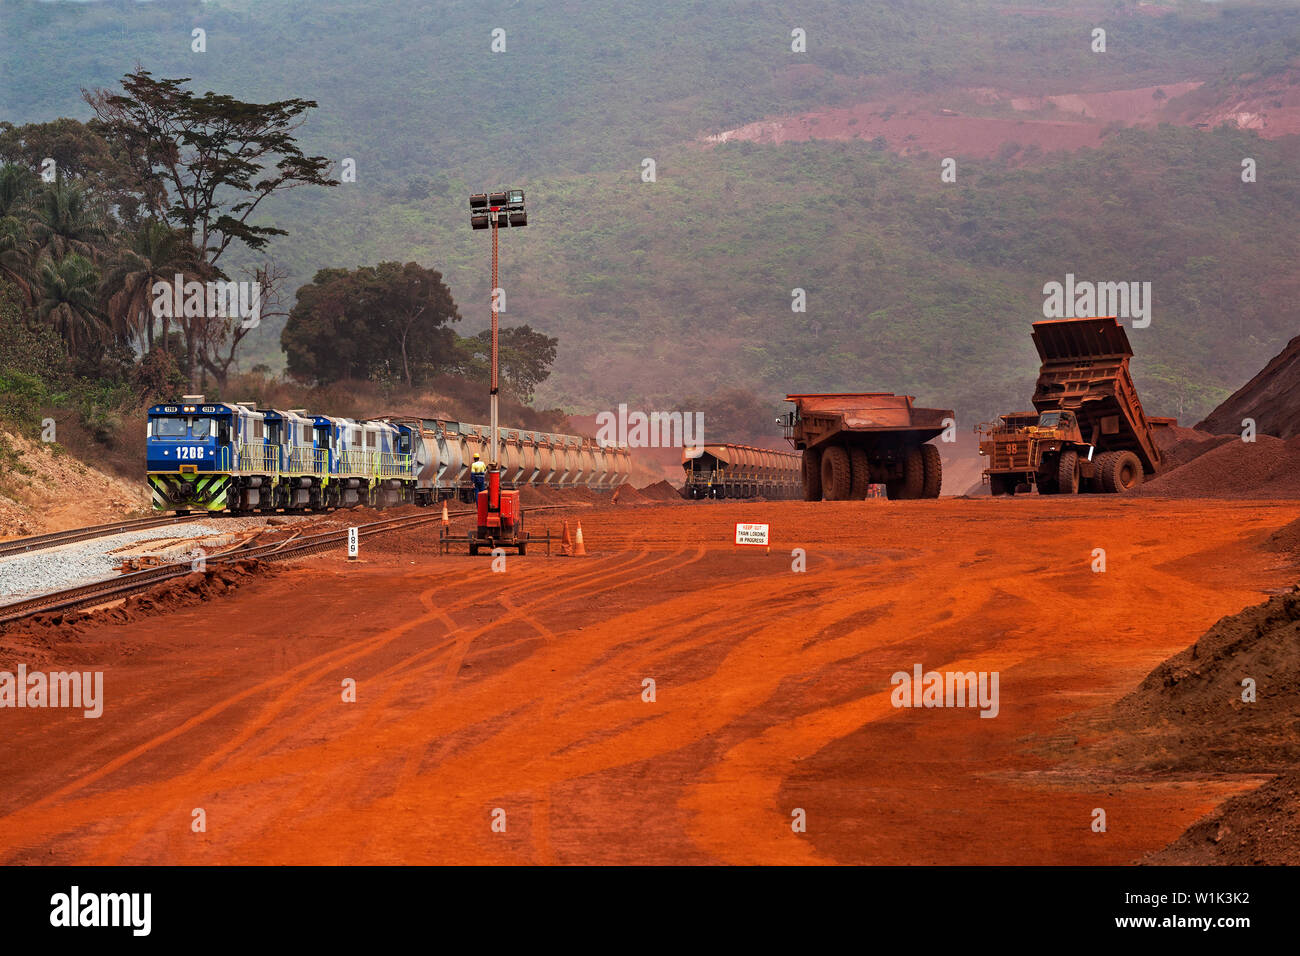 Mining operations for transporting & managing iron ore. Train loading area & trains arriving from & leaving for port. Trucks loading from stock piles Stock Photo